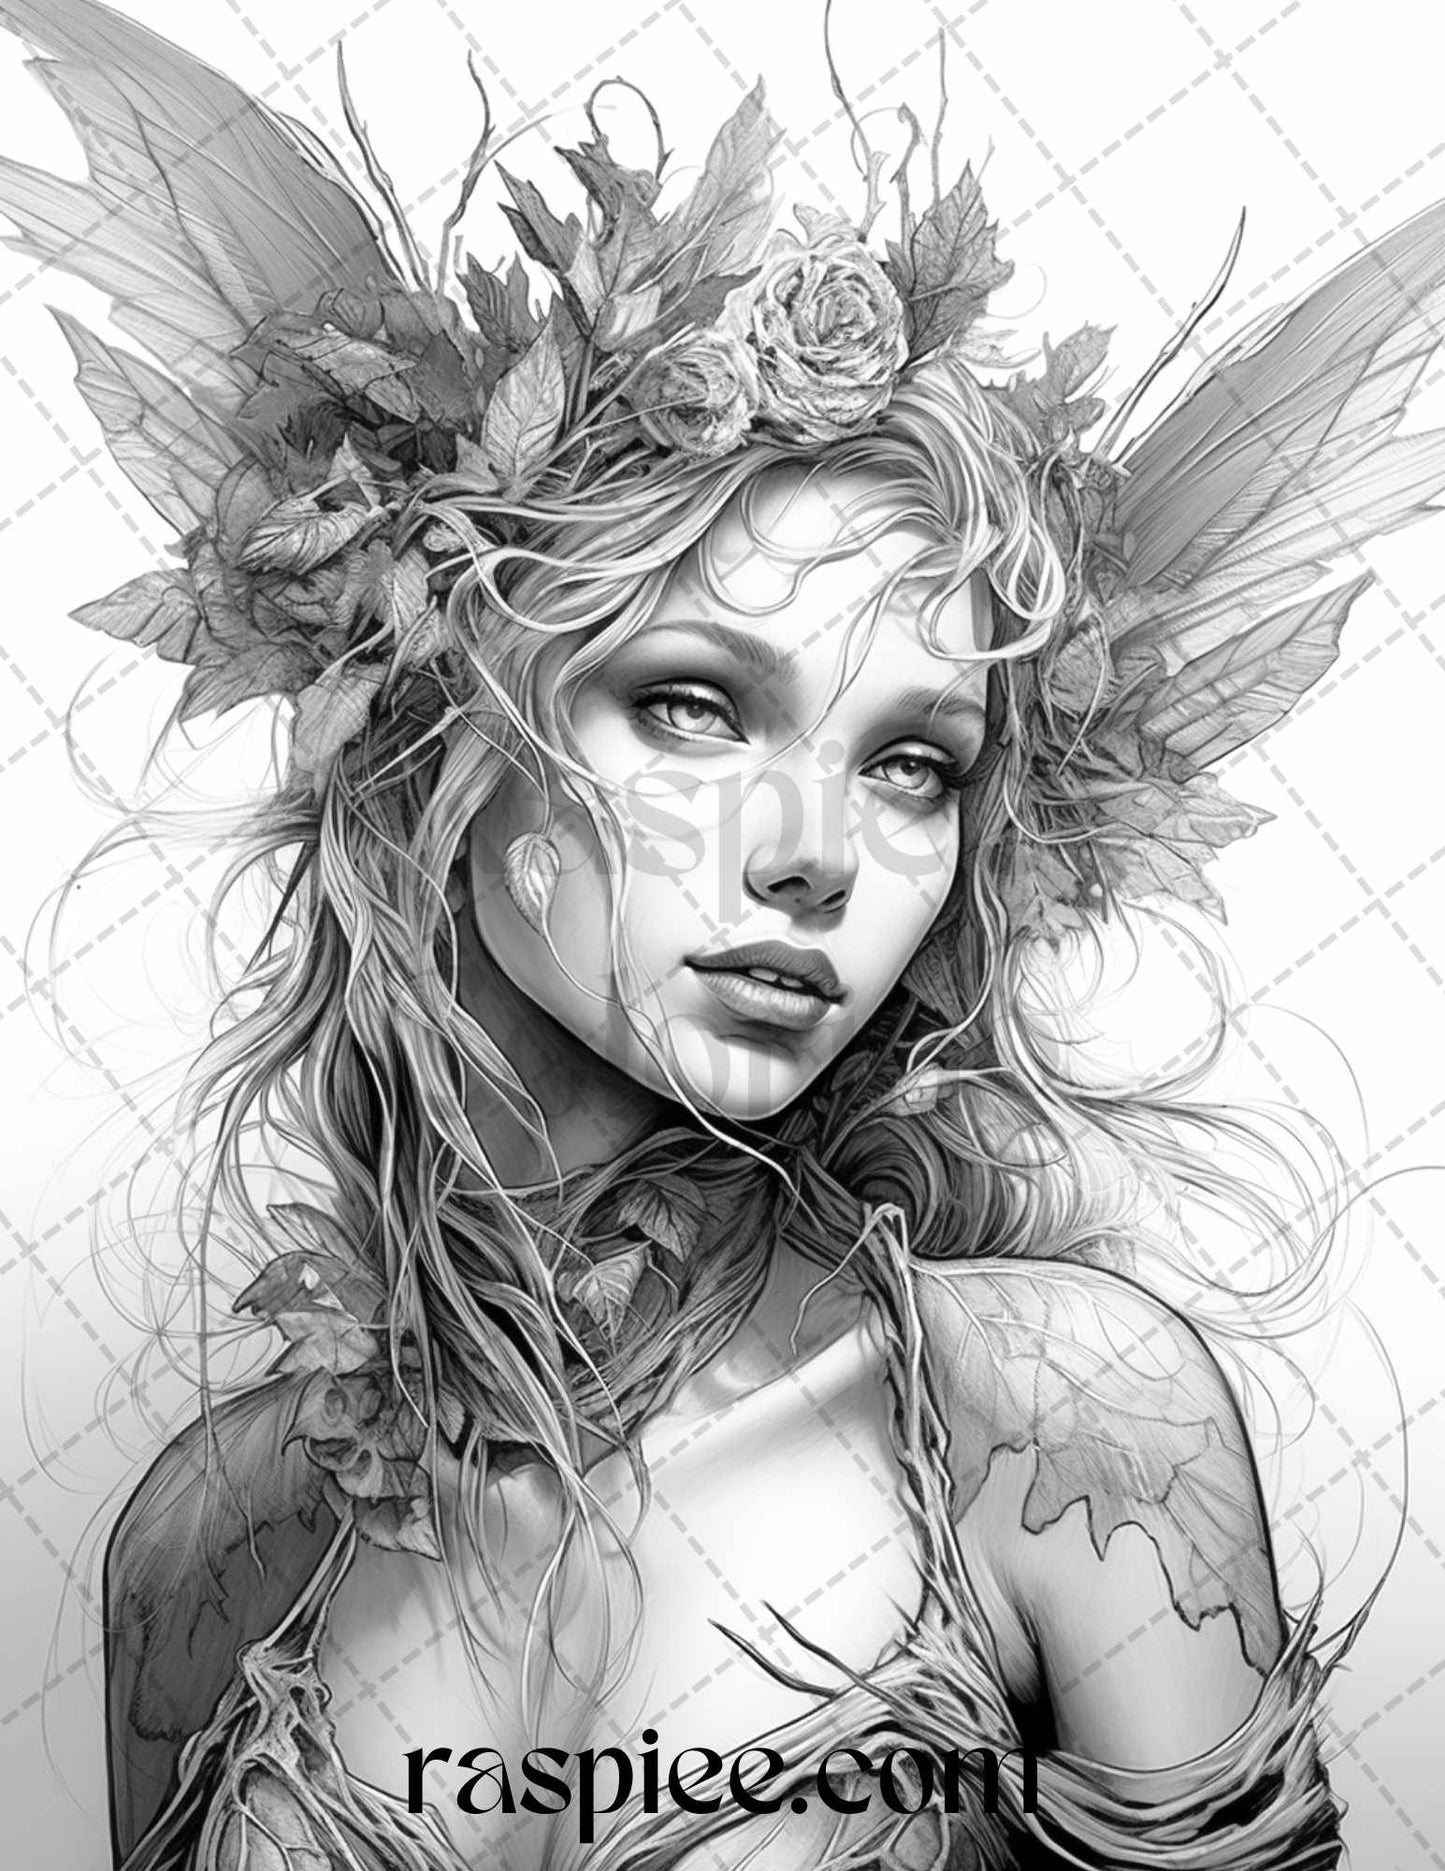 60 Halloween Zombie Fairy Grayscale Coloring Pages Printable for Adults, PDF File Instant Download